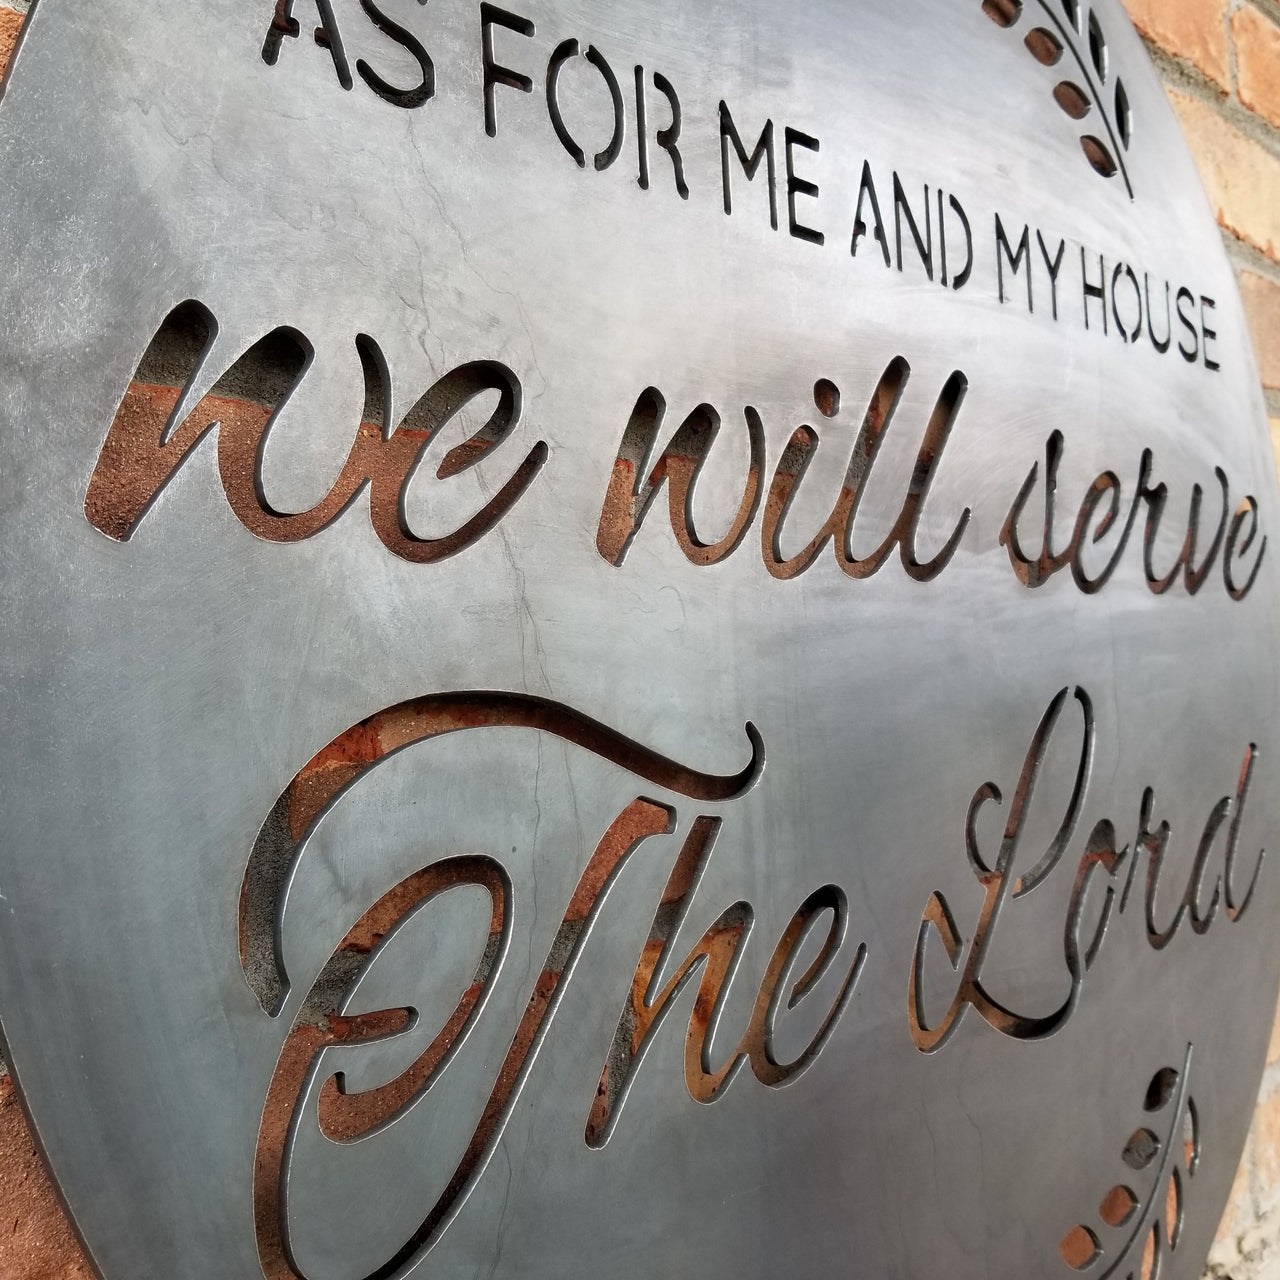 A round sign that reads, " As For Me and My House, We Will Serve the Lord".